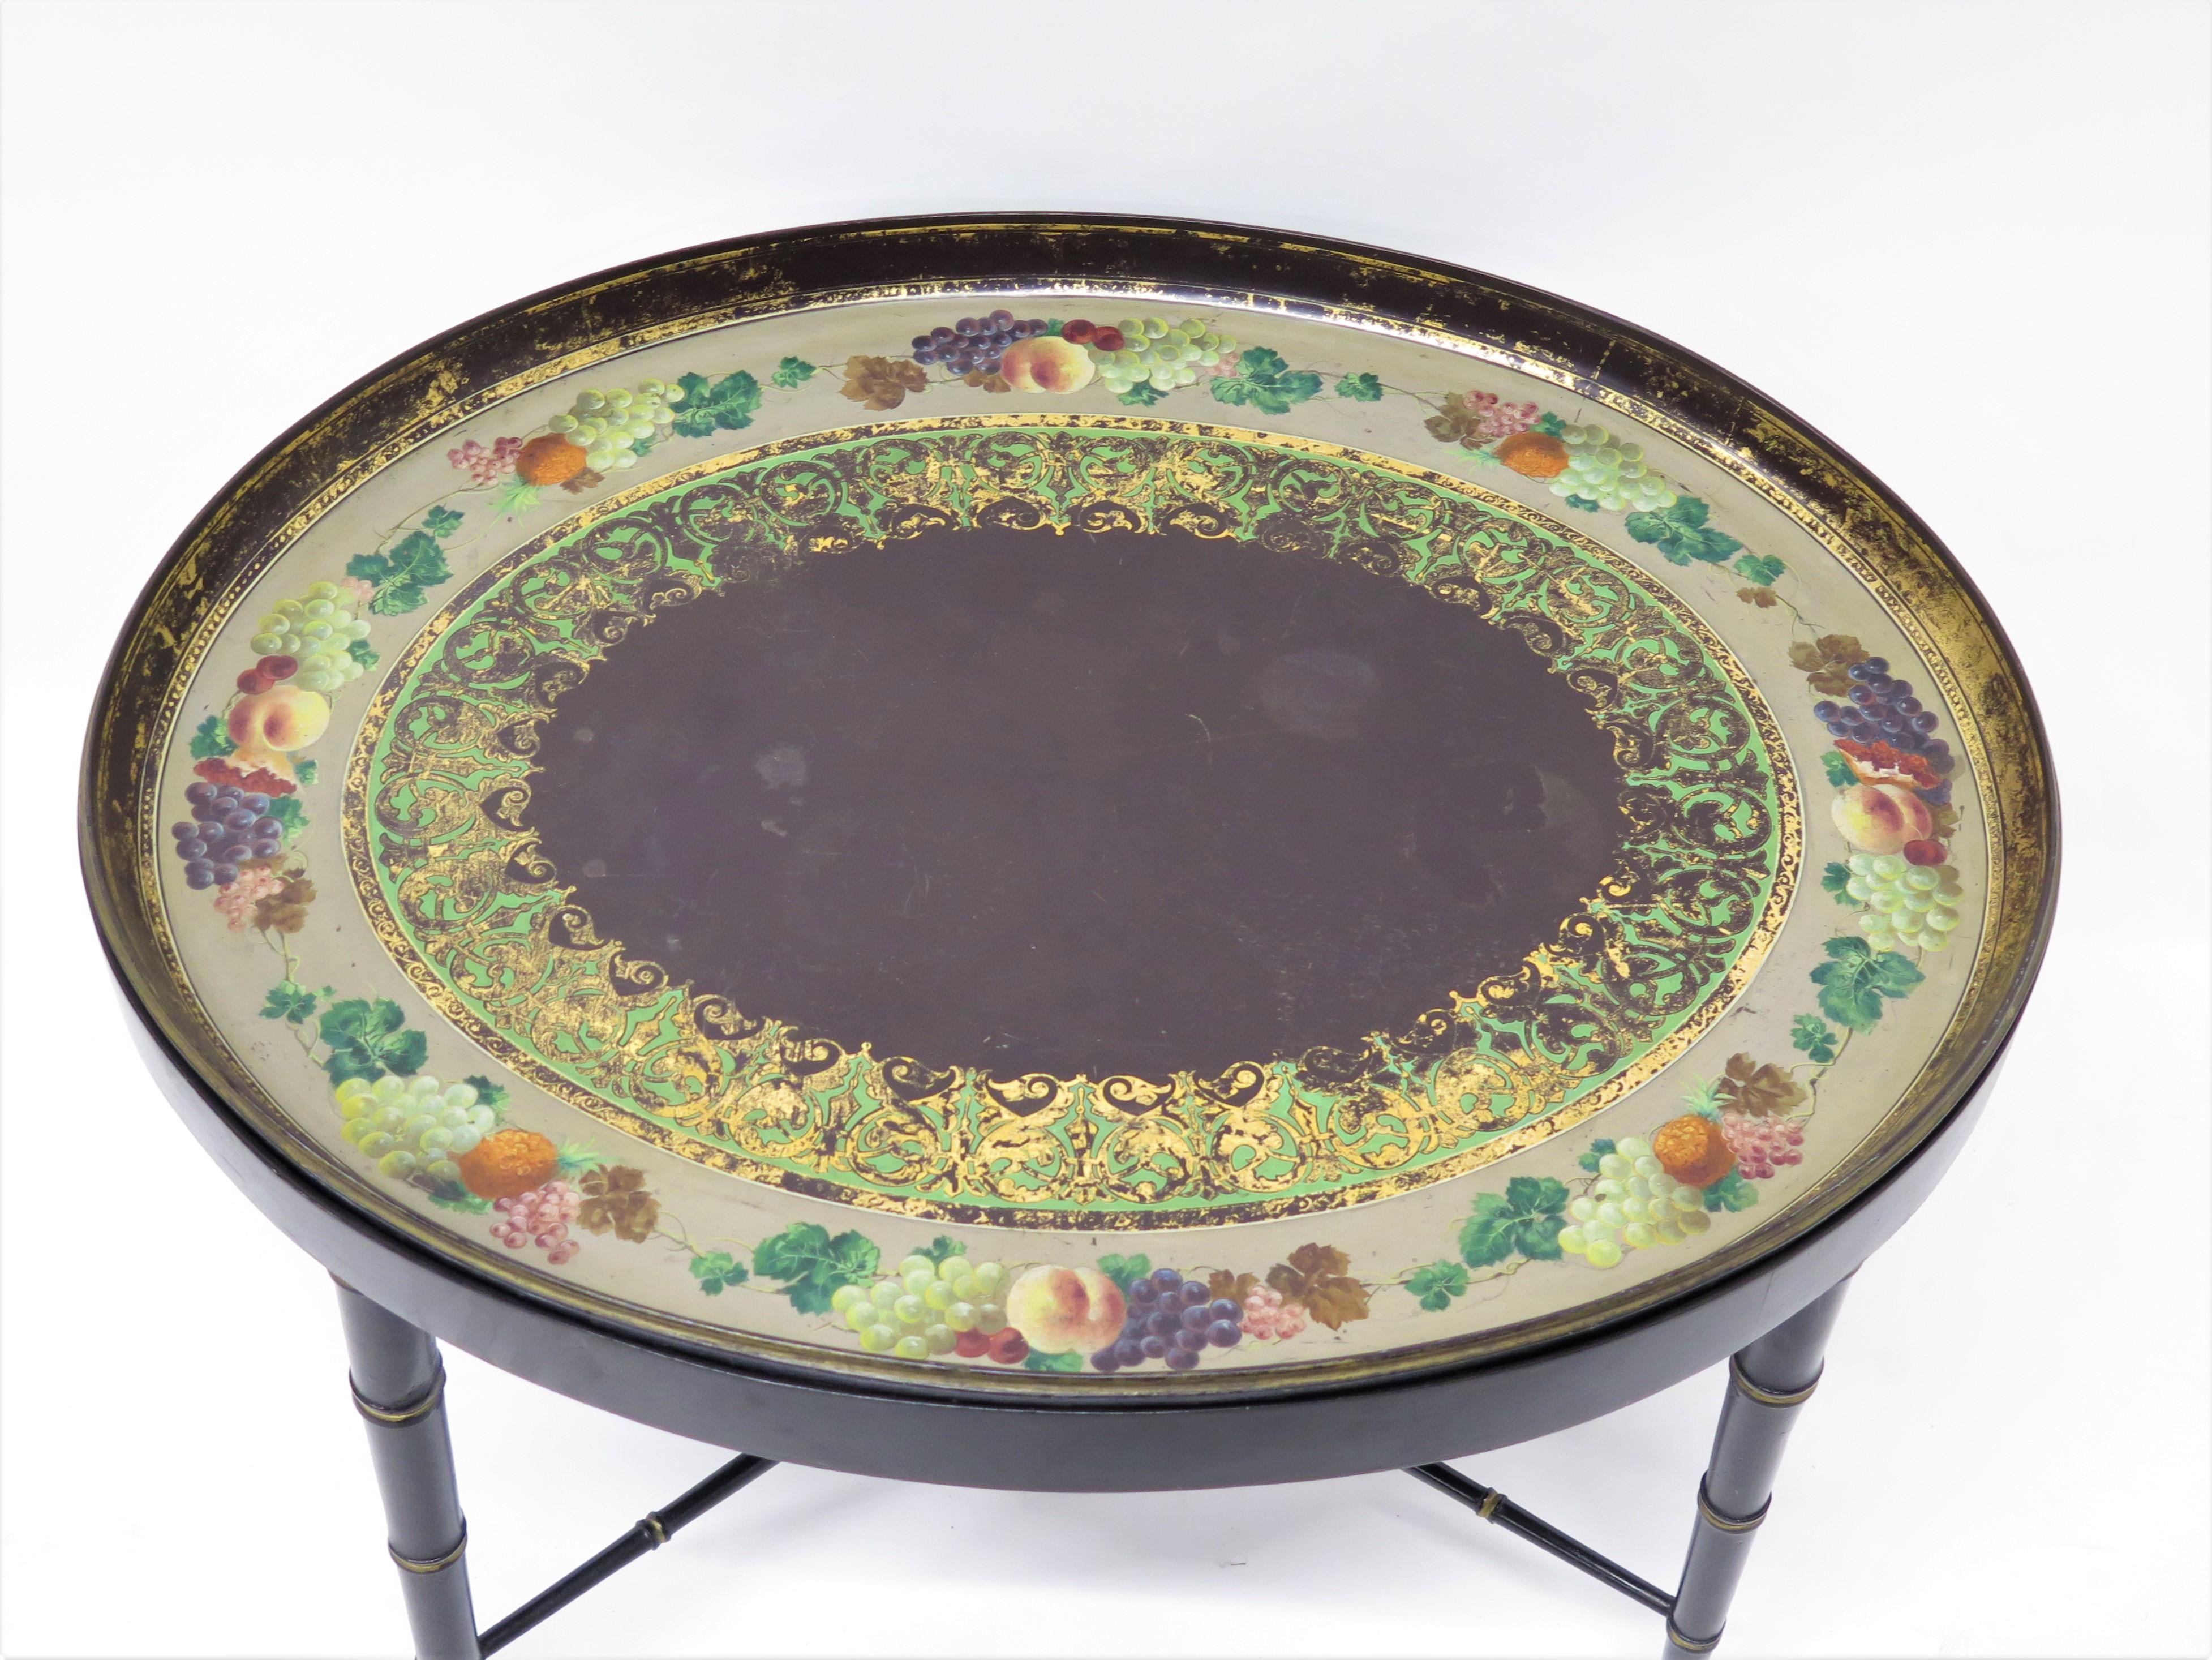 a large oval paint and parcel gilt papier-mâché tray on a faux bamboo stand with X-stretcher, some losses to gold embellishments on green and gold inner border, beautiful hand-painted fruit, including grapes and grape leaves border, England, 19th